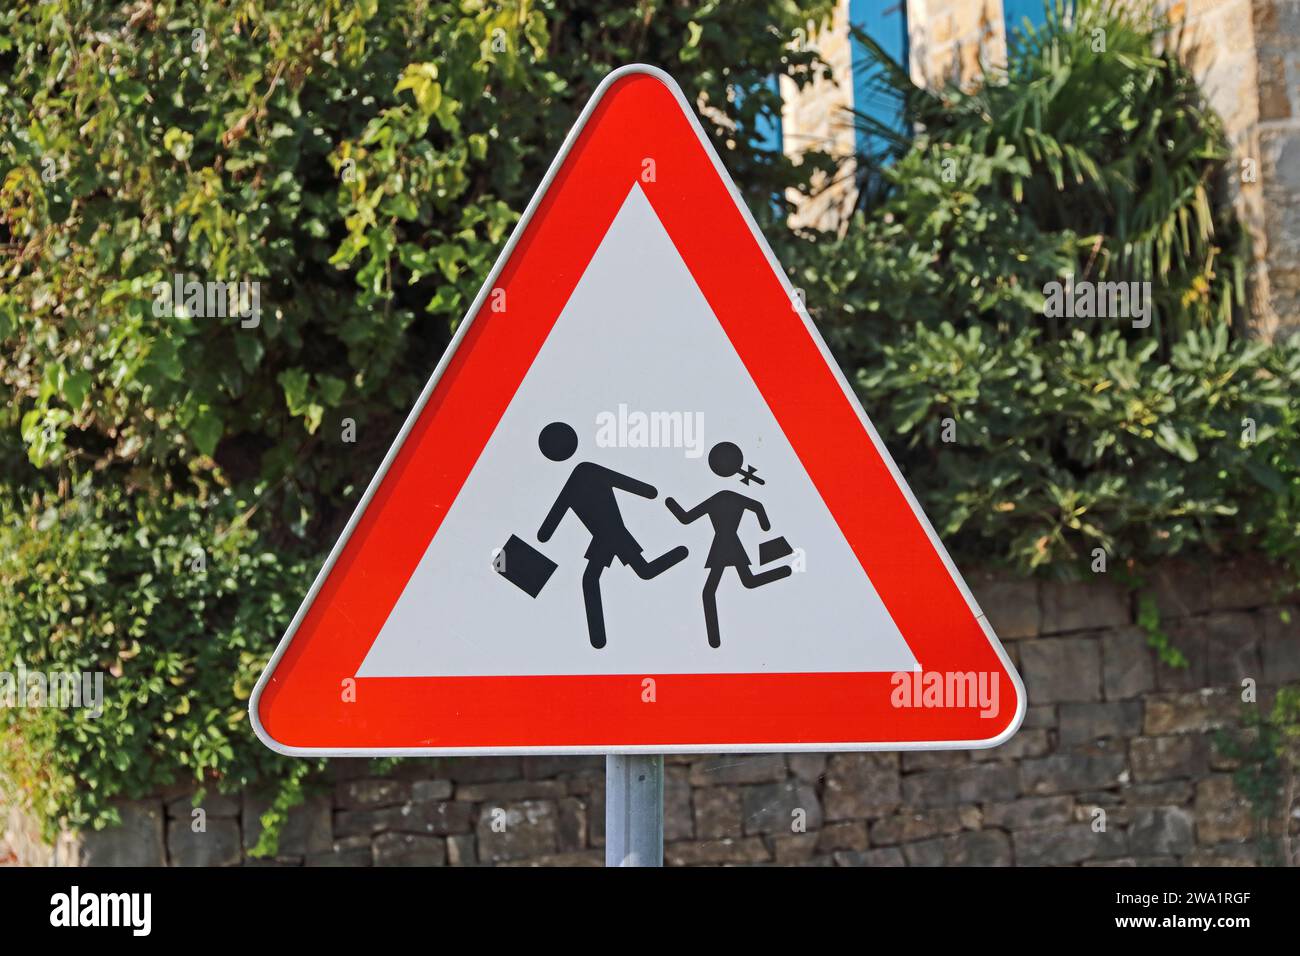 Attention, children crossing road sign Stock Photo